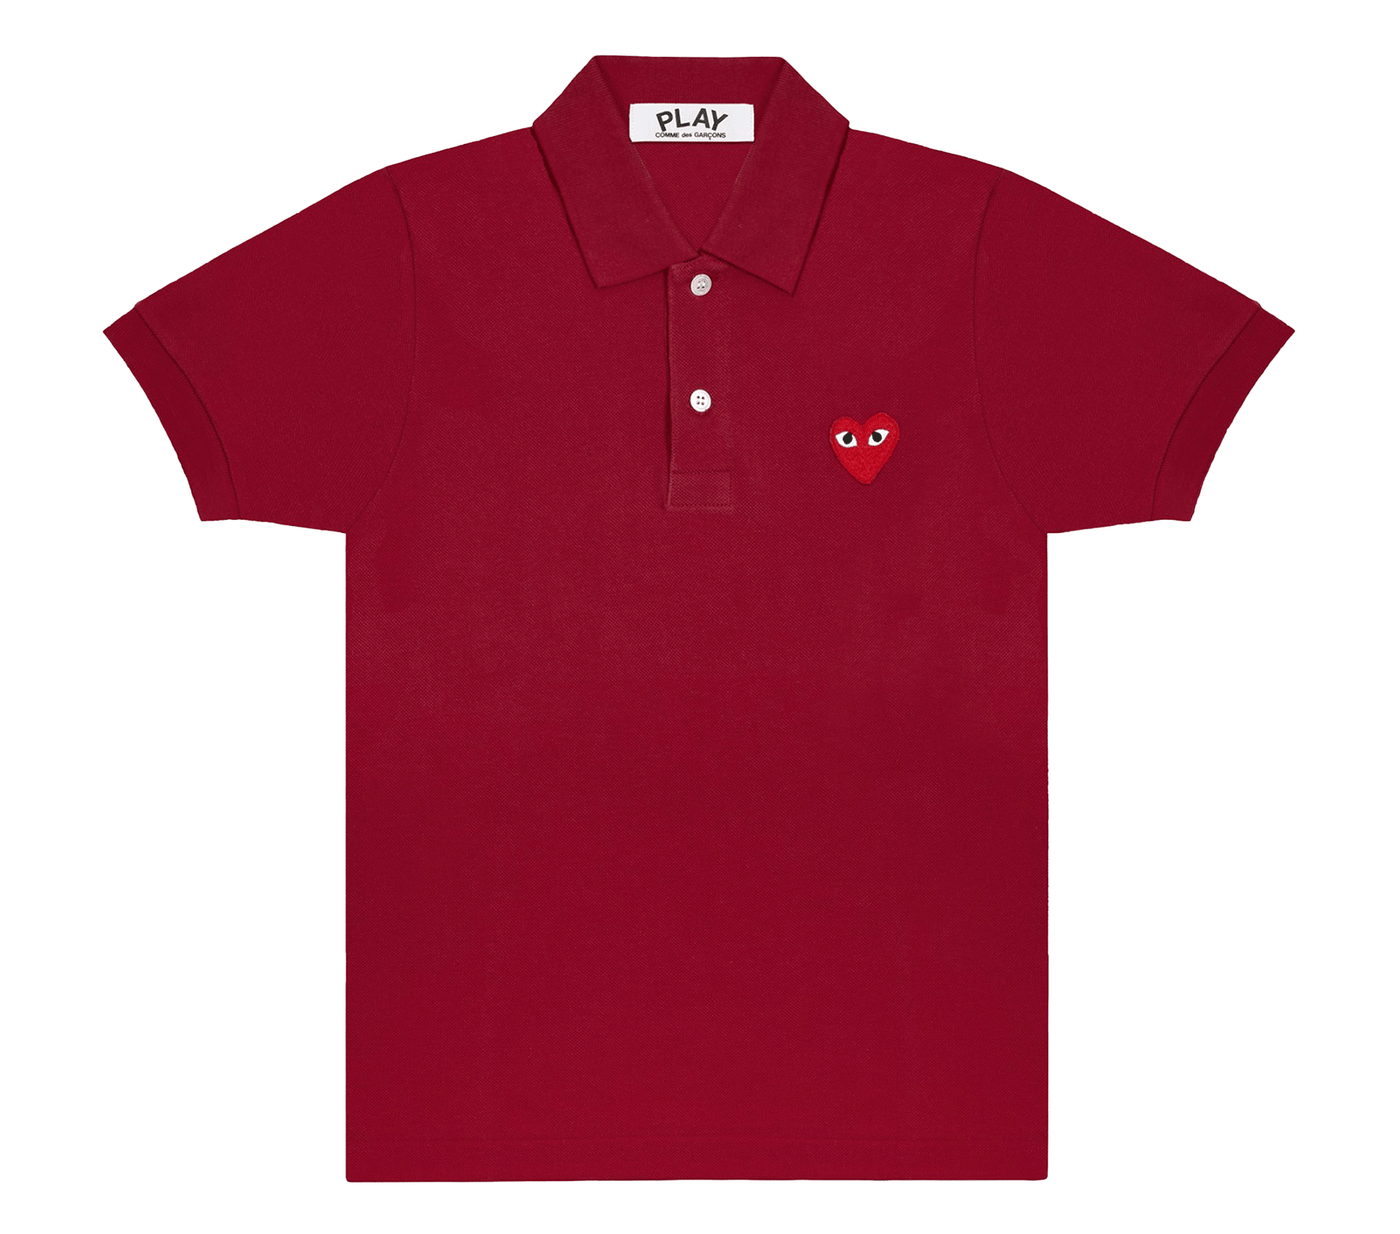    Comme-des-Garcons-Play-Polo-Shirt-with-Red-Emblem-Women-DarkRed-1